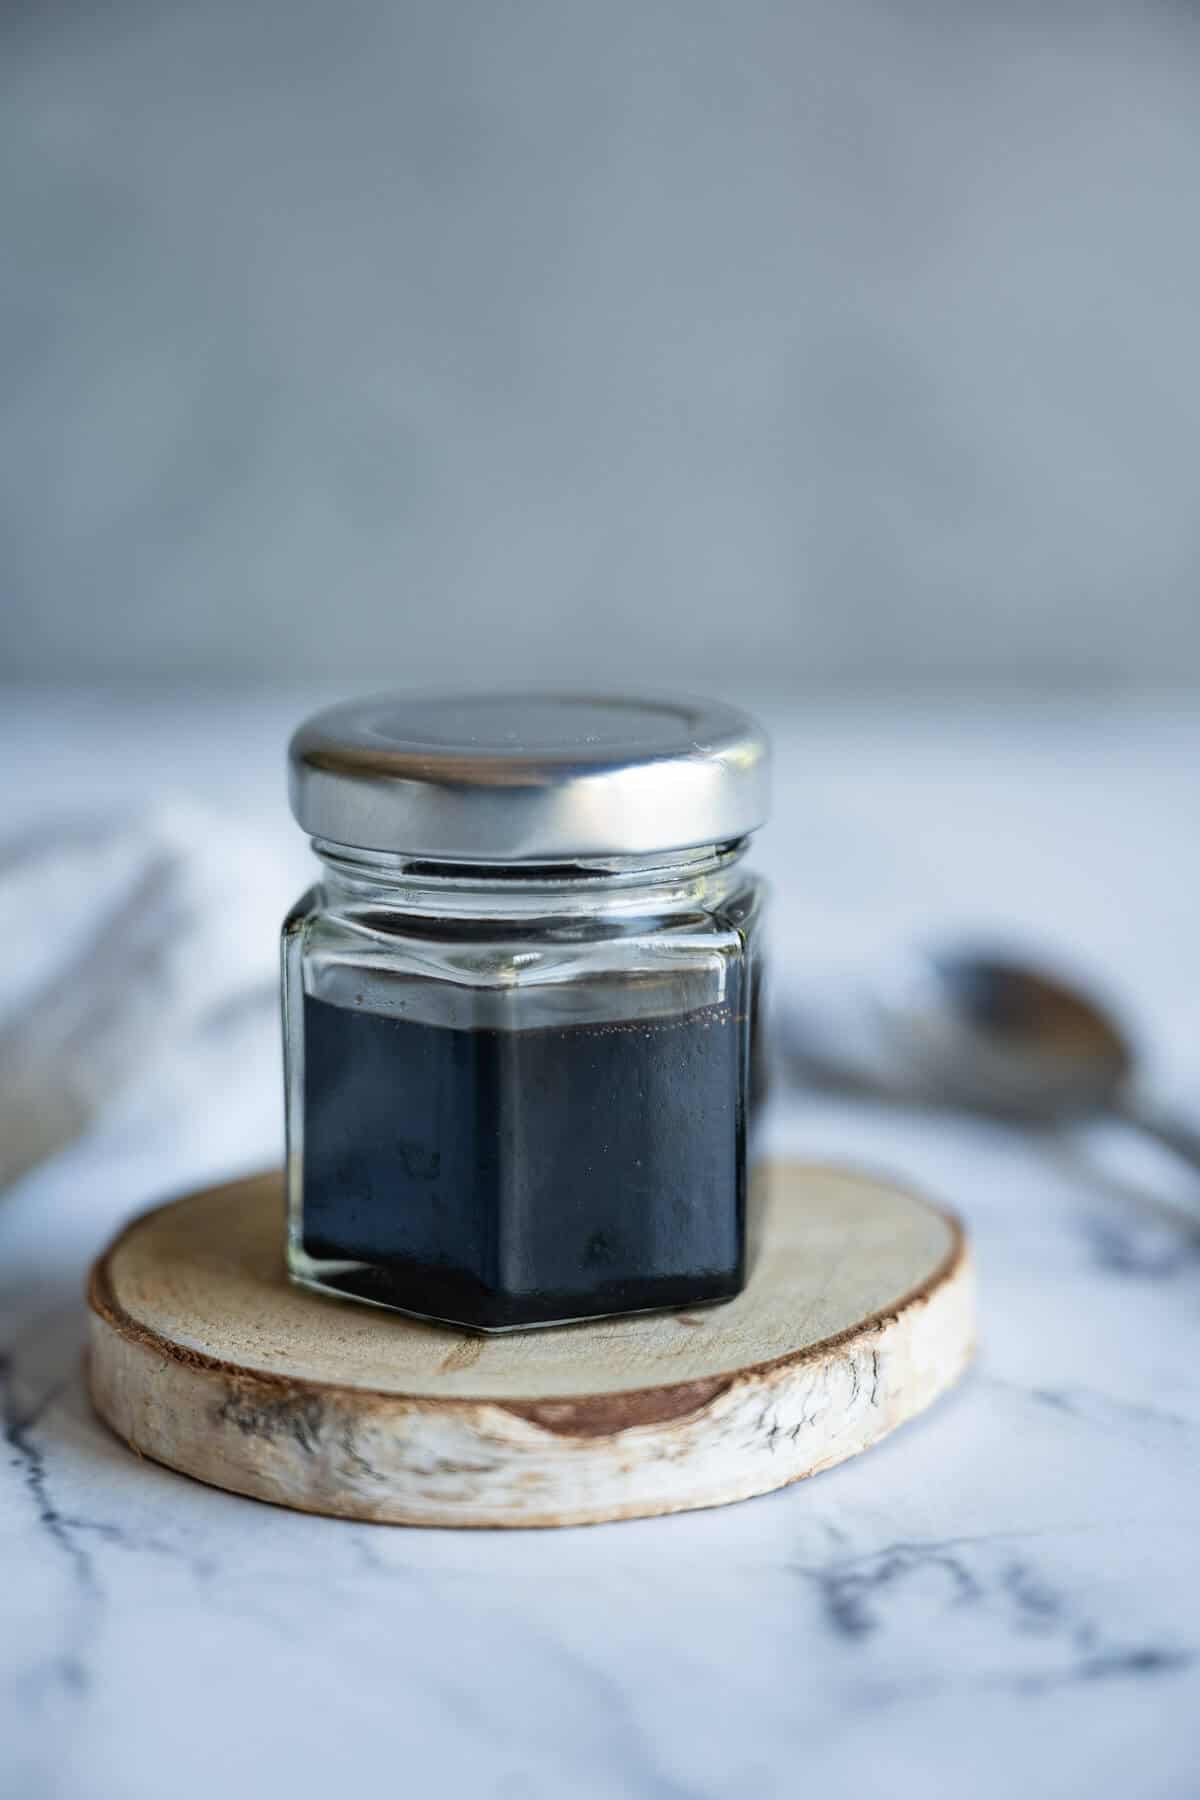 Small glass jar of balsamic reduction sauce.